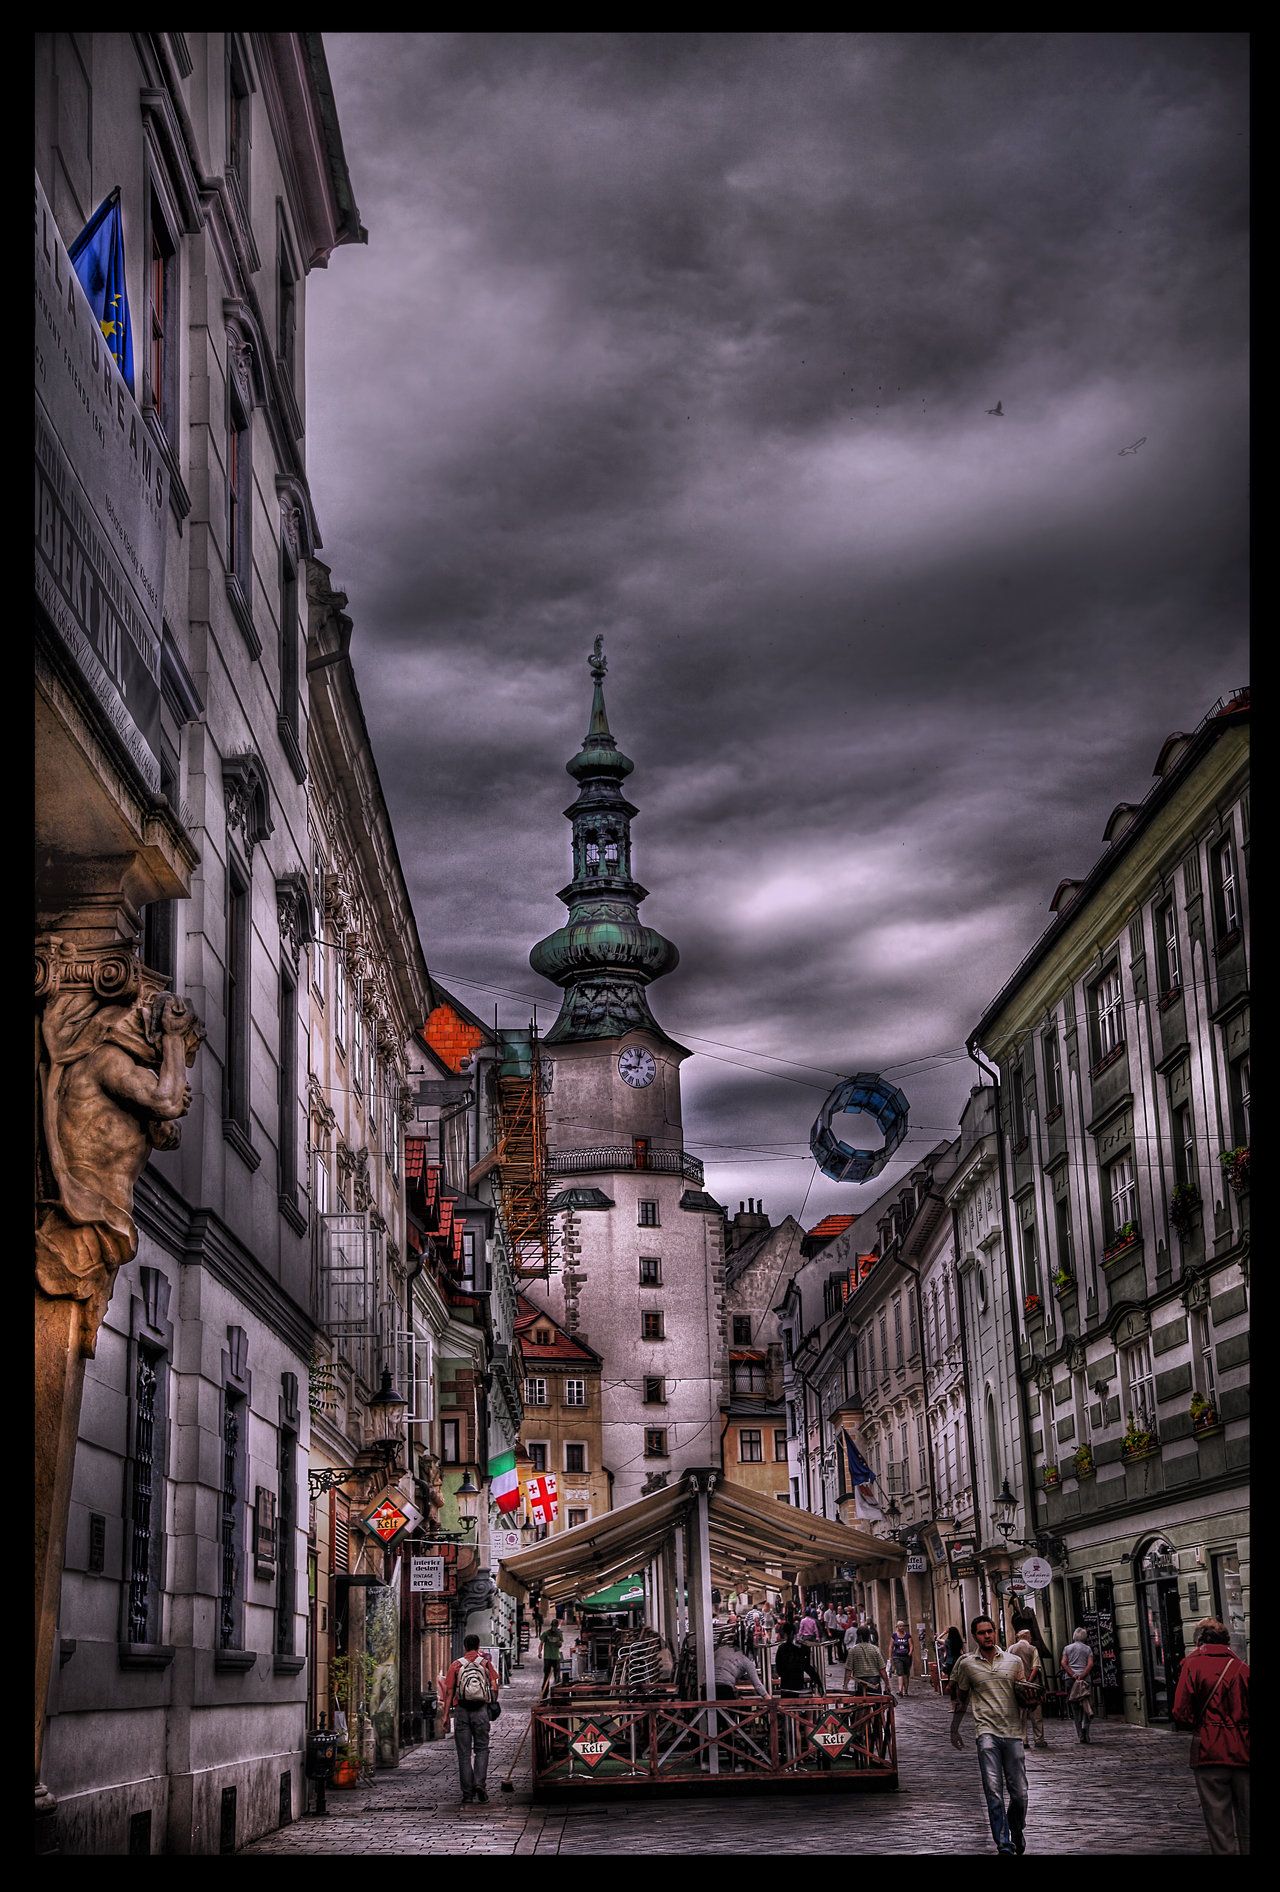 The Magic Gate HDR | HDR | Pinterest | HdR, Gate and Bratislava